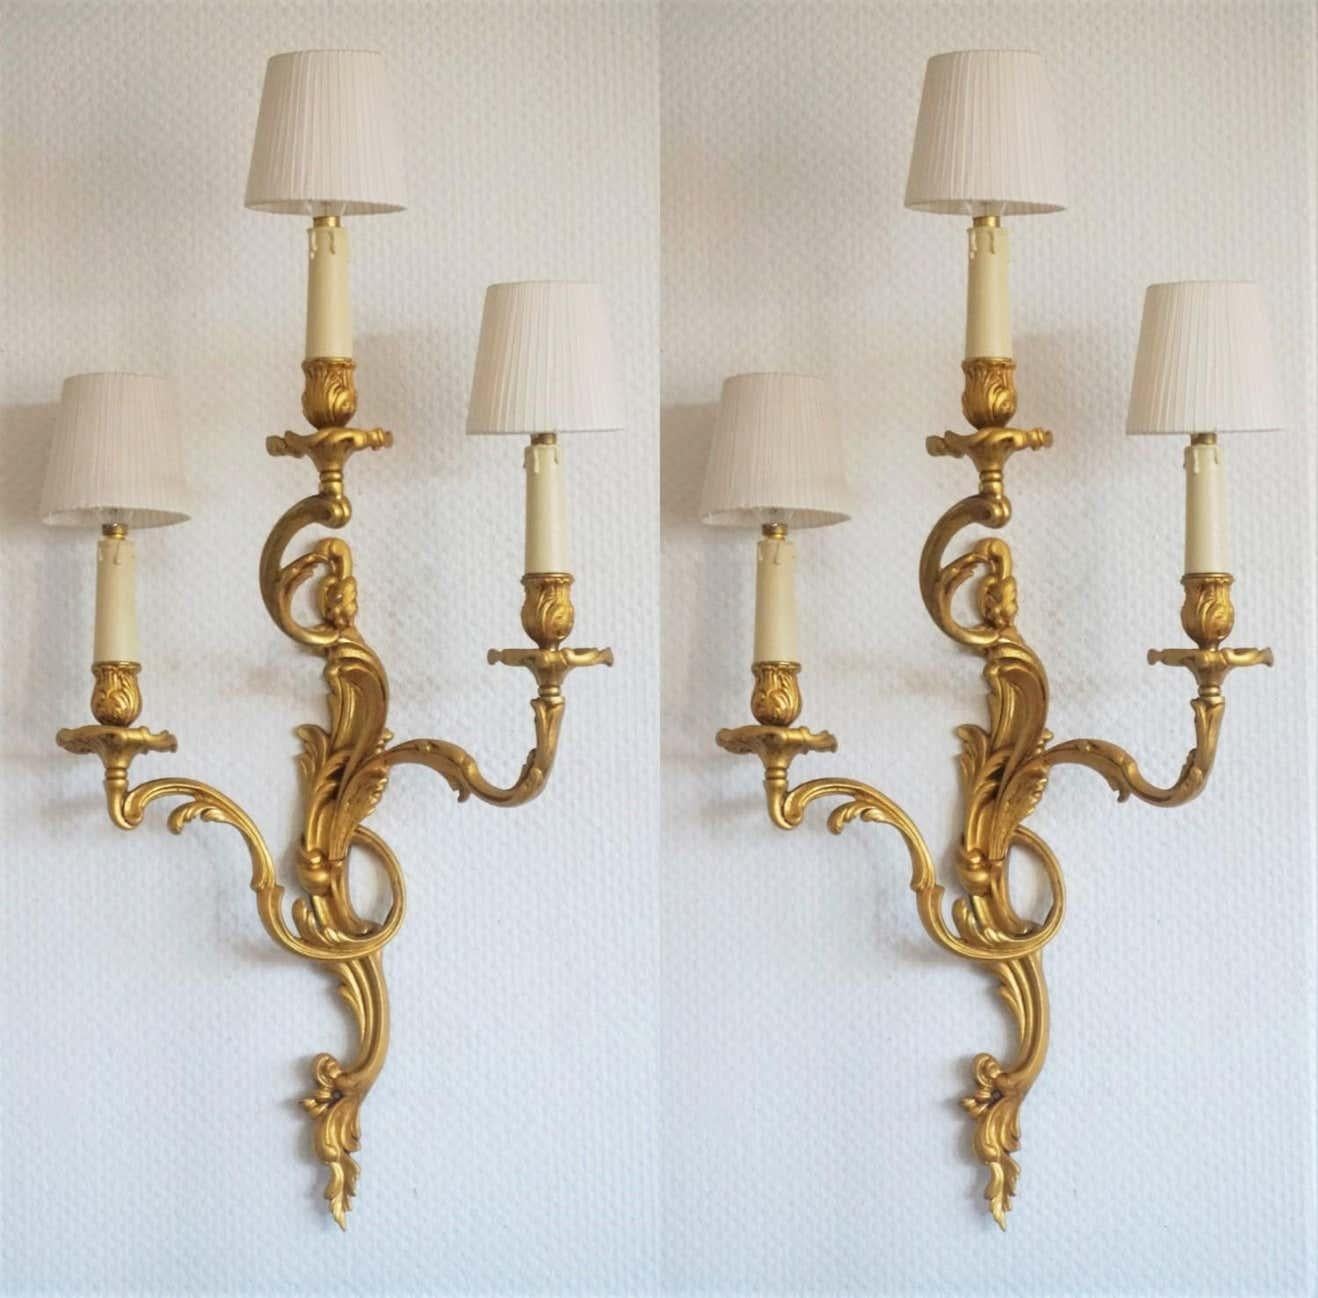 A large pair of Louis XVI style gilt bronze three-light candelabra wall sconces richly decorated with foliage, France, circa 1880-1890. Electrified at a later time. Beautiful aged patina to bronze.
Three E14 candelabra light bulb holders with